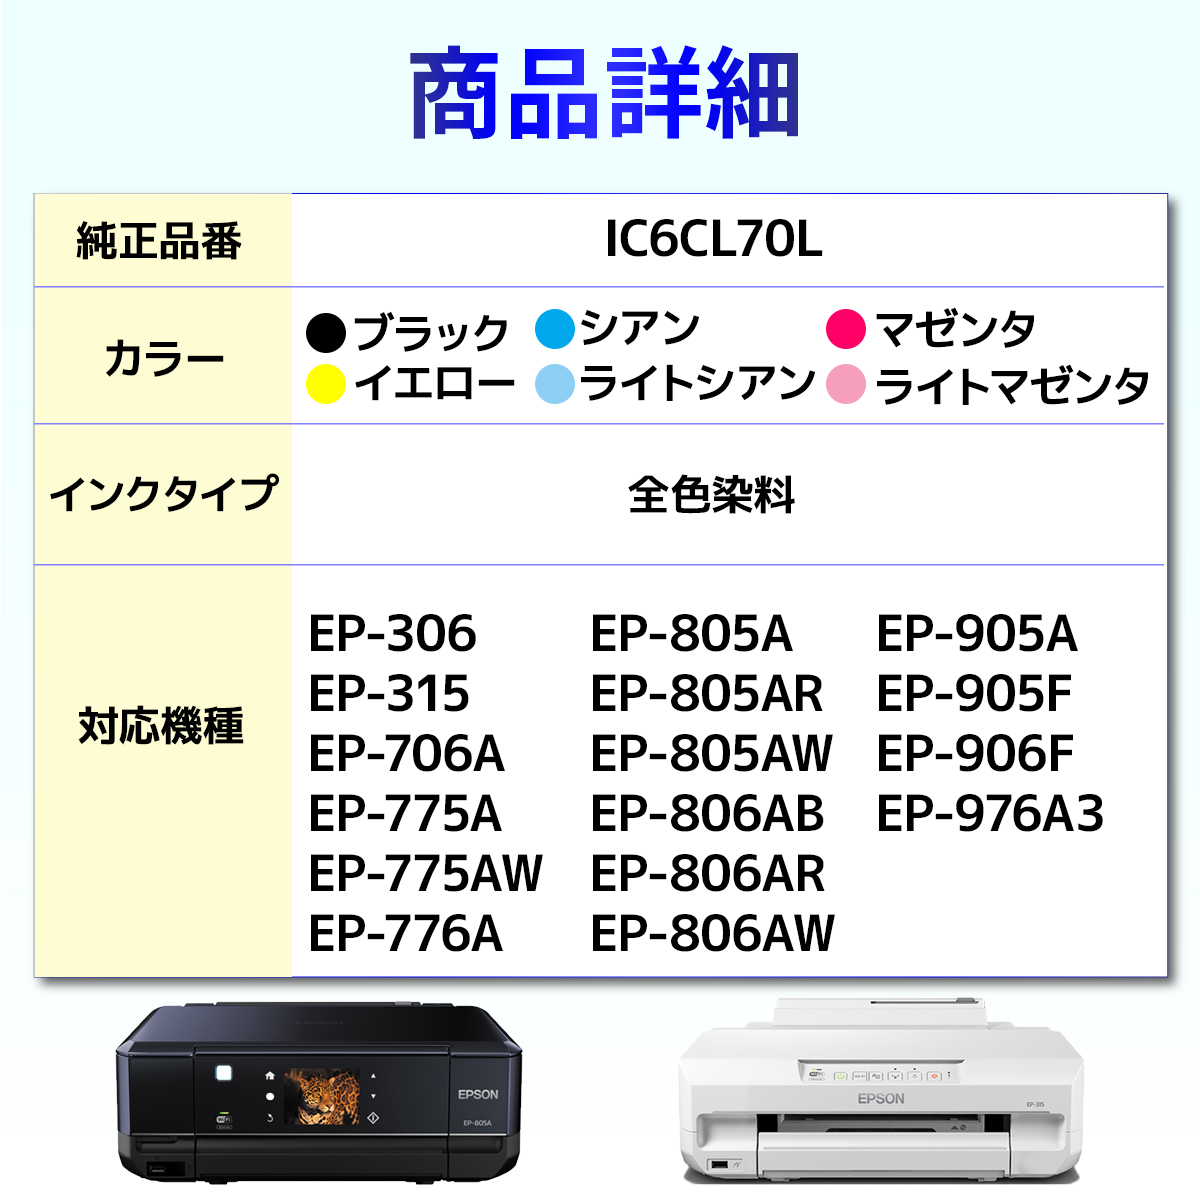 IC6CL70L IC6CL70 IC70 さくらんぼ 互換インク ７個 EP-306 EP-315 EP-706A EP-775A/AW EP-776A EP-805A/AR/AW EP-806AB/AR/AW EP-905A/F EP-906F EP-976A3｜baustore｜03